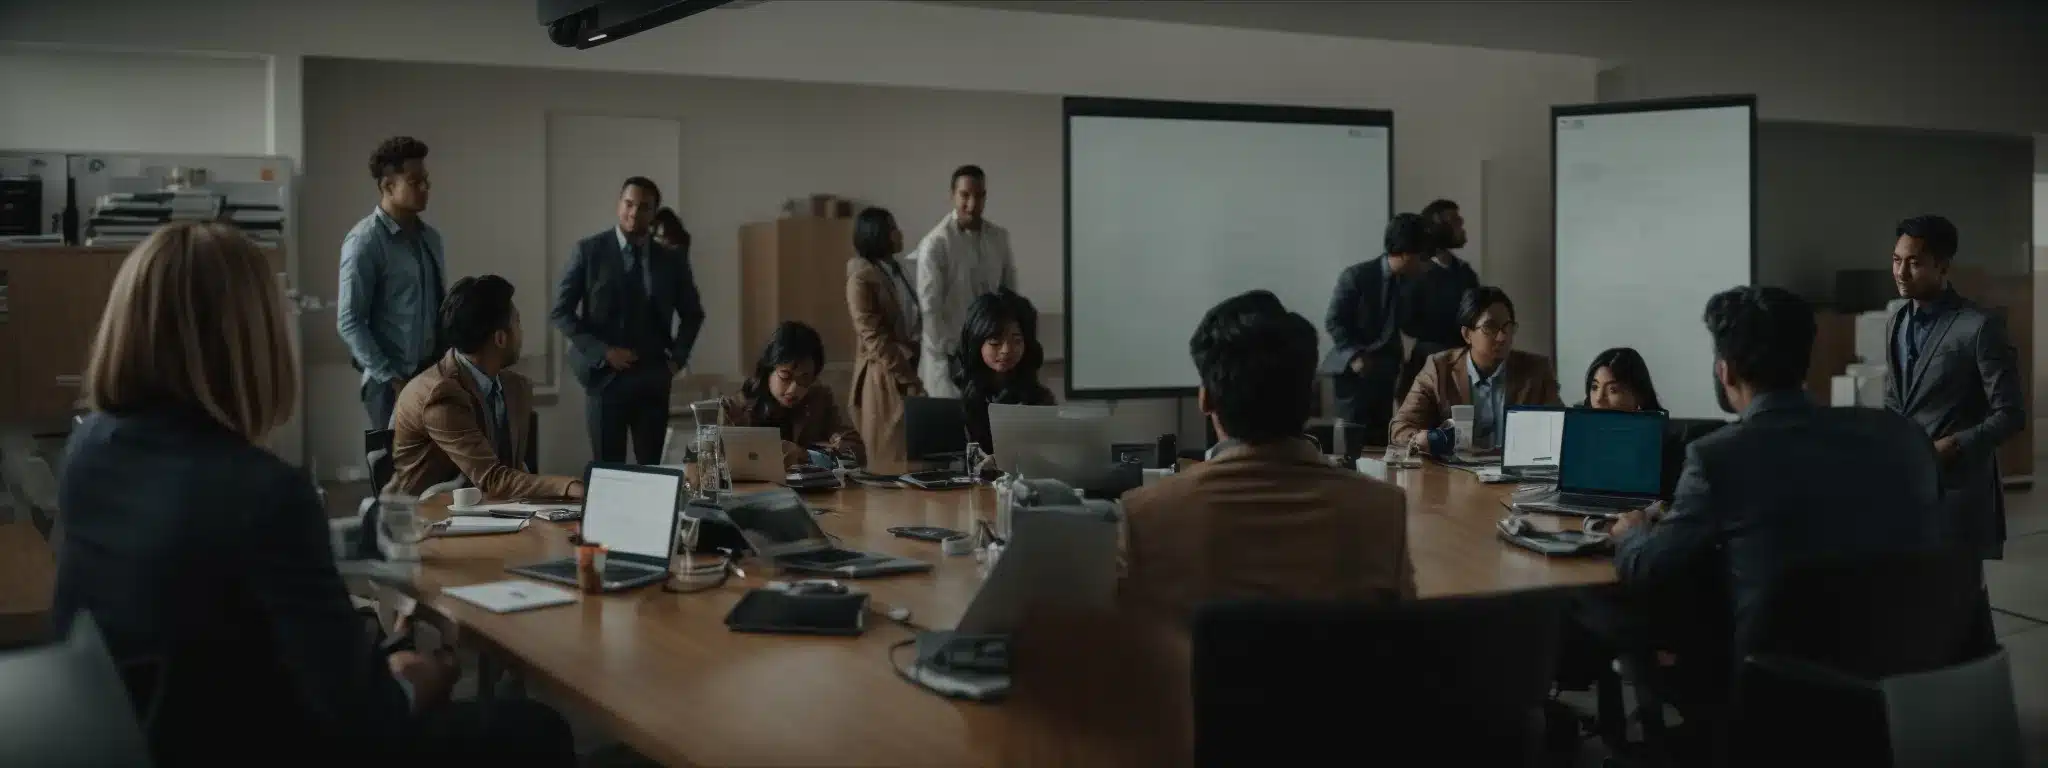 A Team Gathered Around A Conference Table, Enthusiastically Discussing Over Laptops And Digital Devices, With A Clear Whiteboard In The Background.